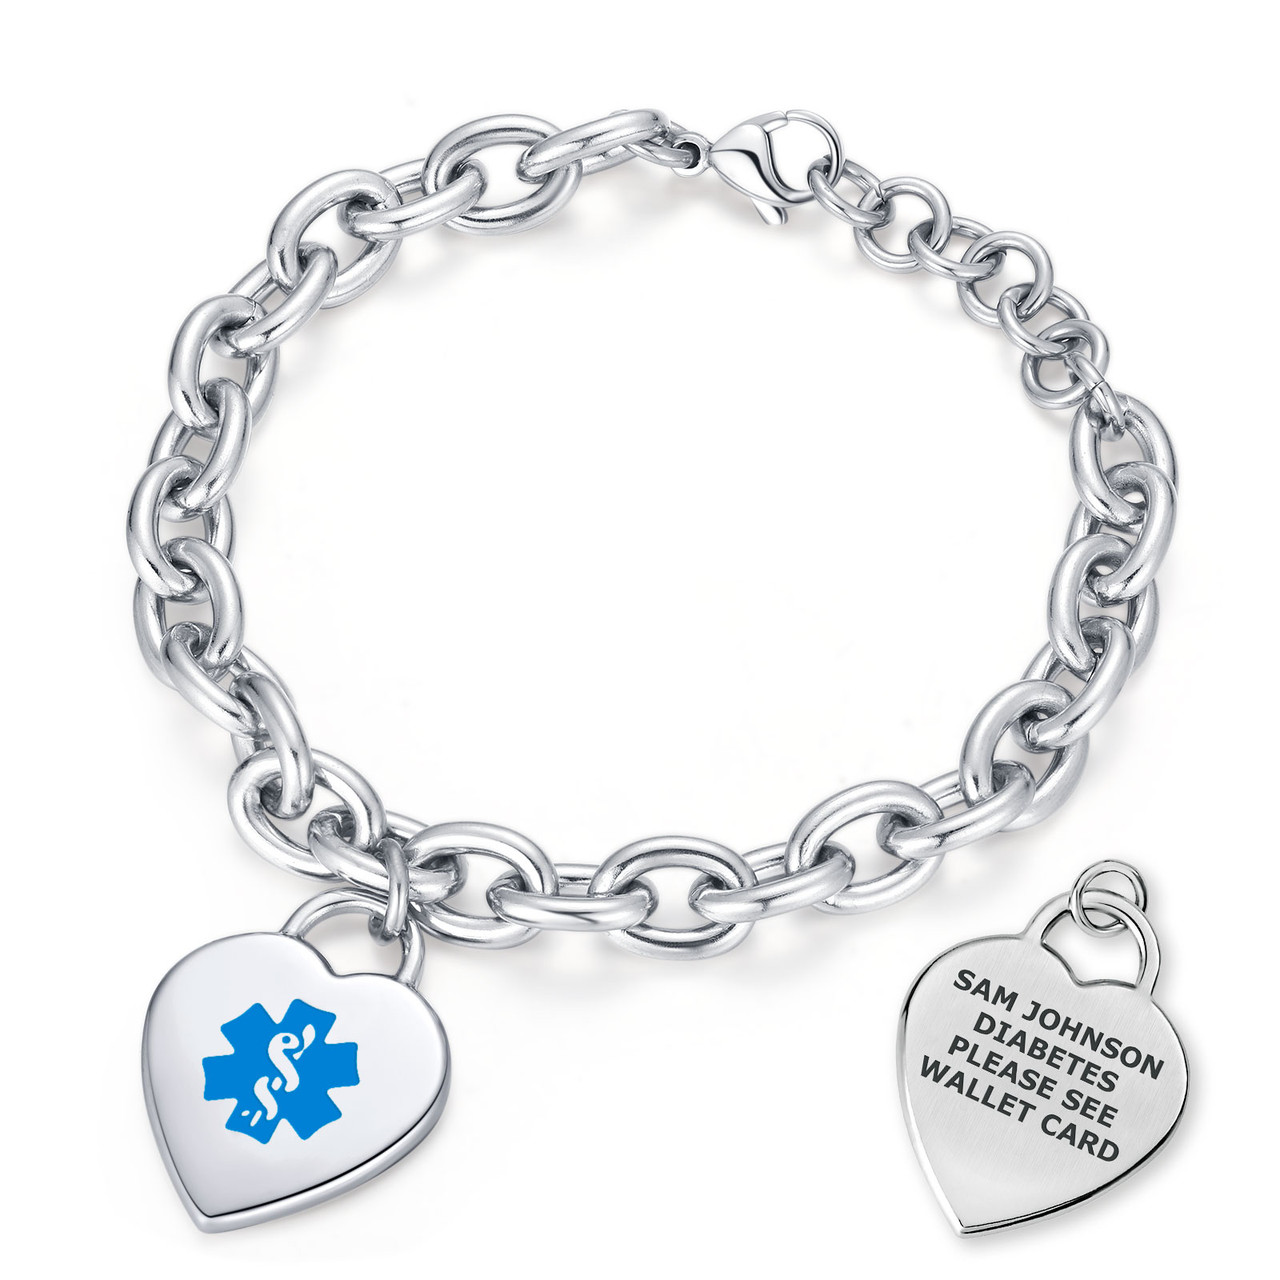 Personalized Medical ID Beaded Bracelet - Miles Kimball